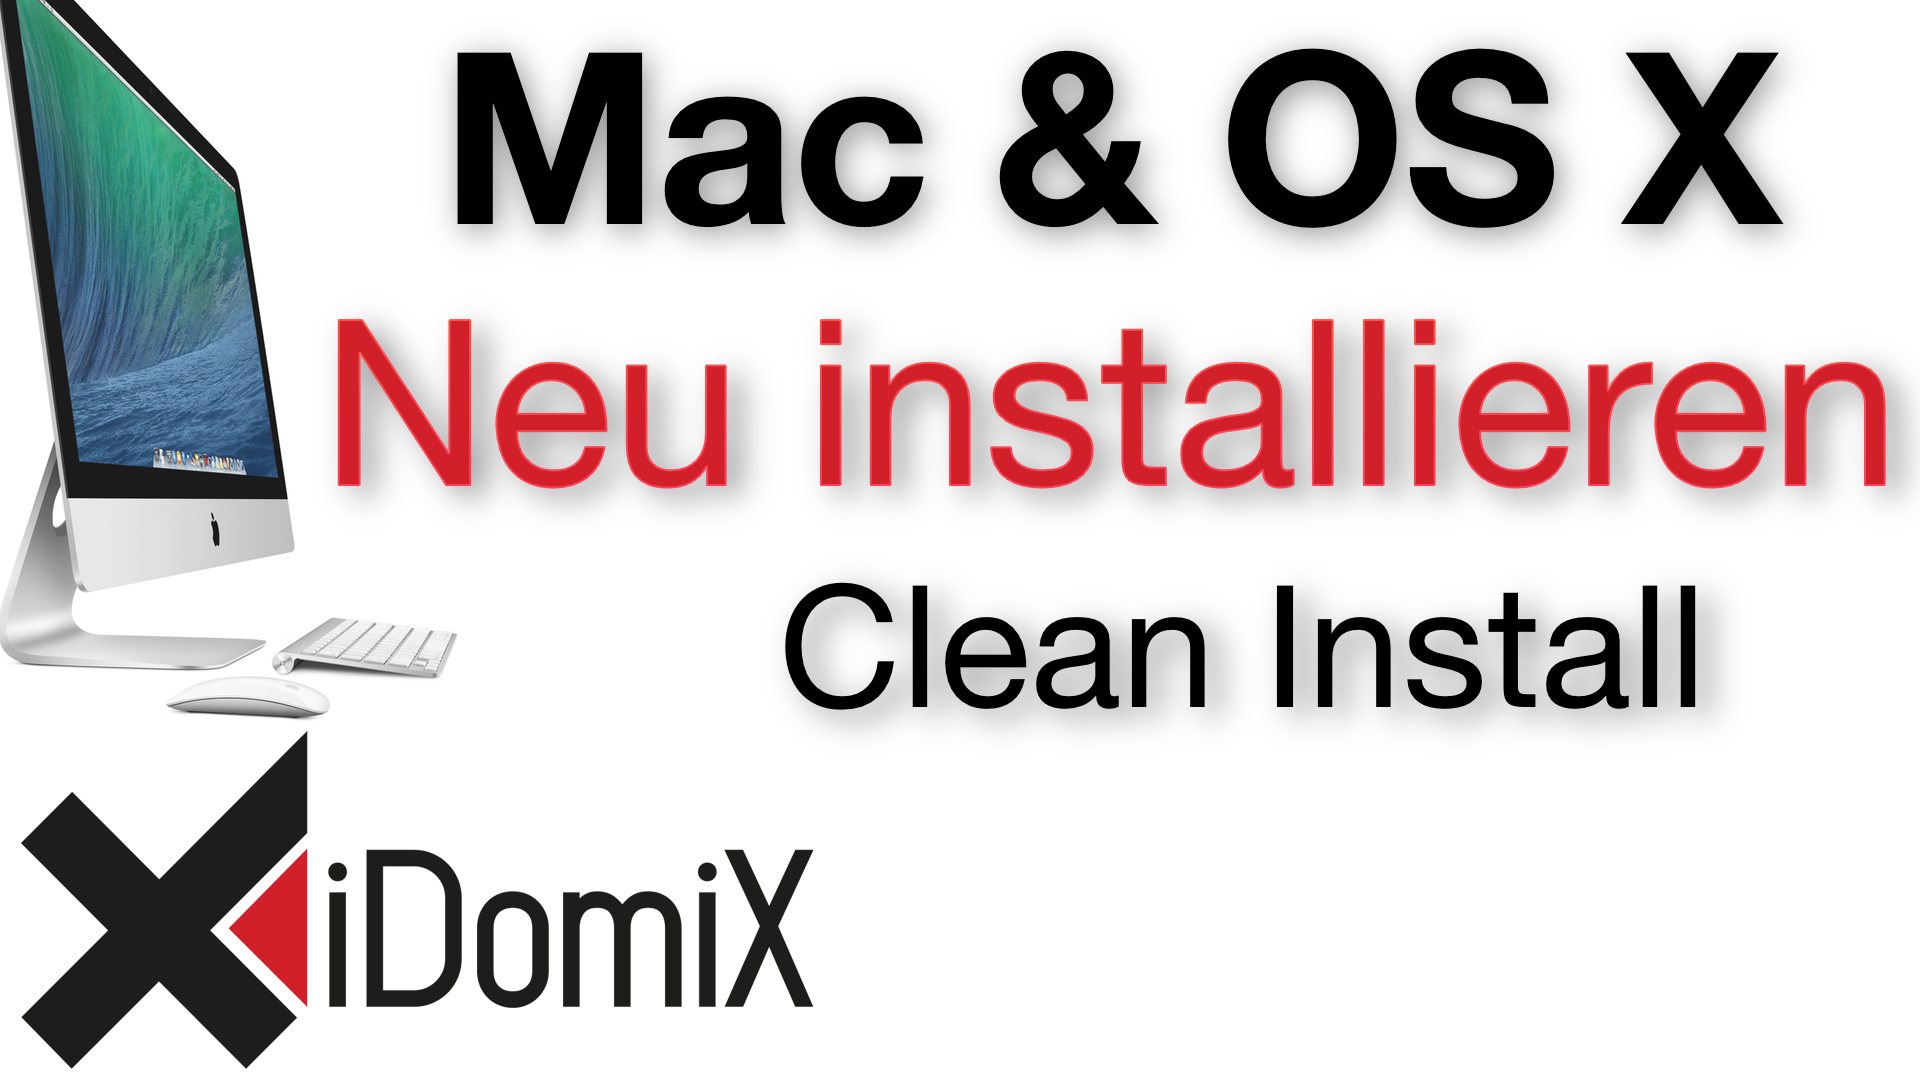 download ccleaner for mac 10.12